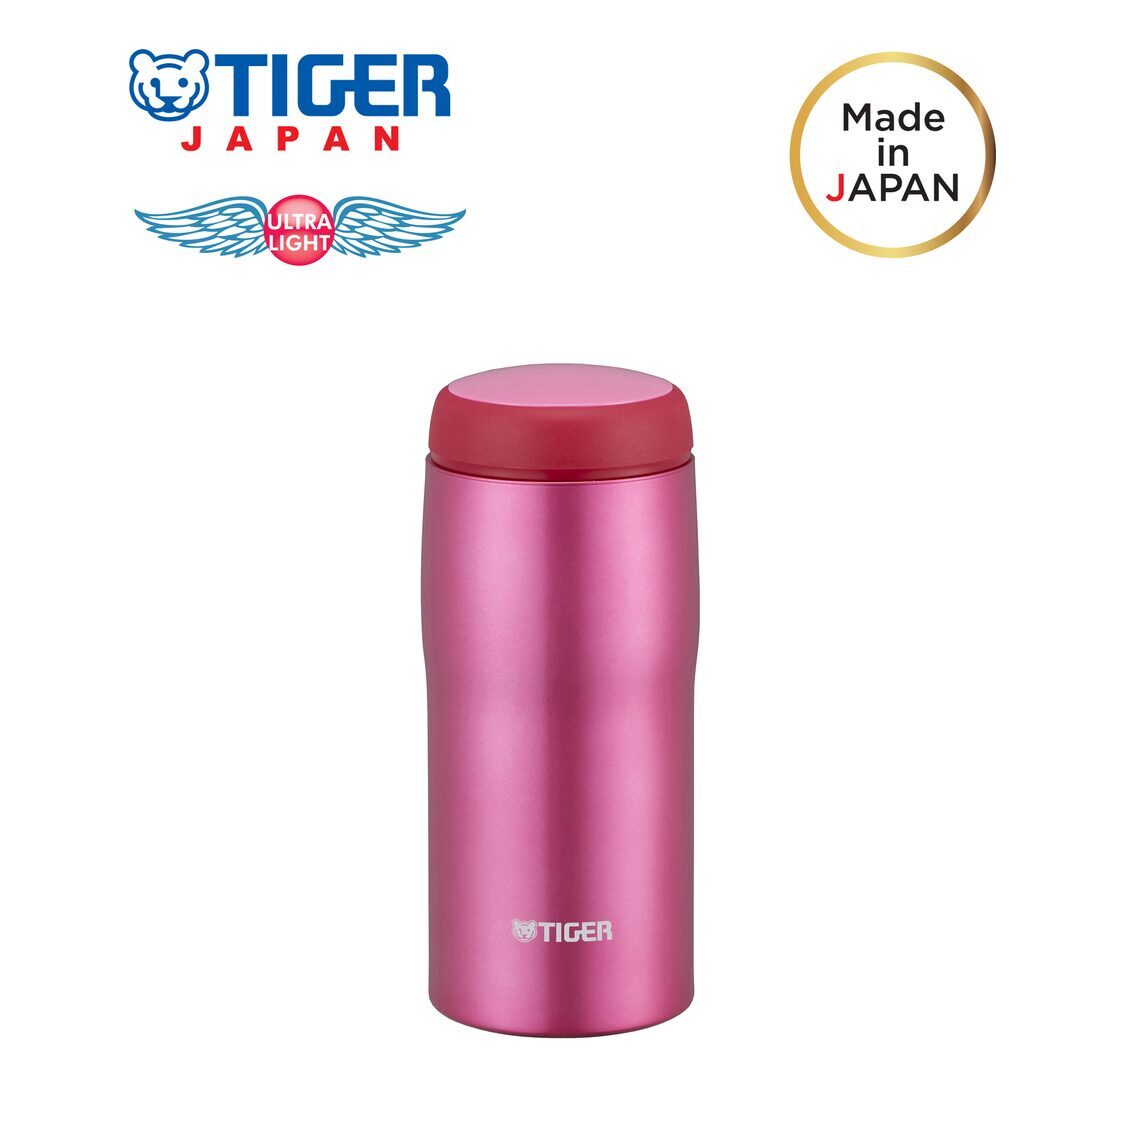 TIGER 360ML Ultra-Light Double Stainless Steel Bottle - Bright Pink Made in Japan MJA-B036 PB